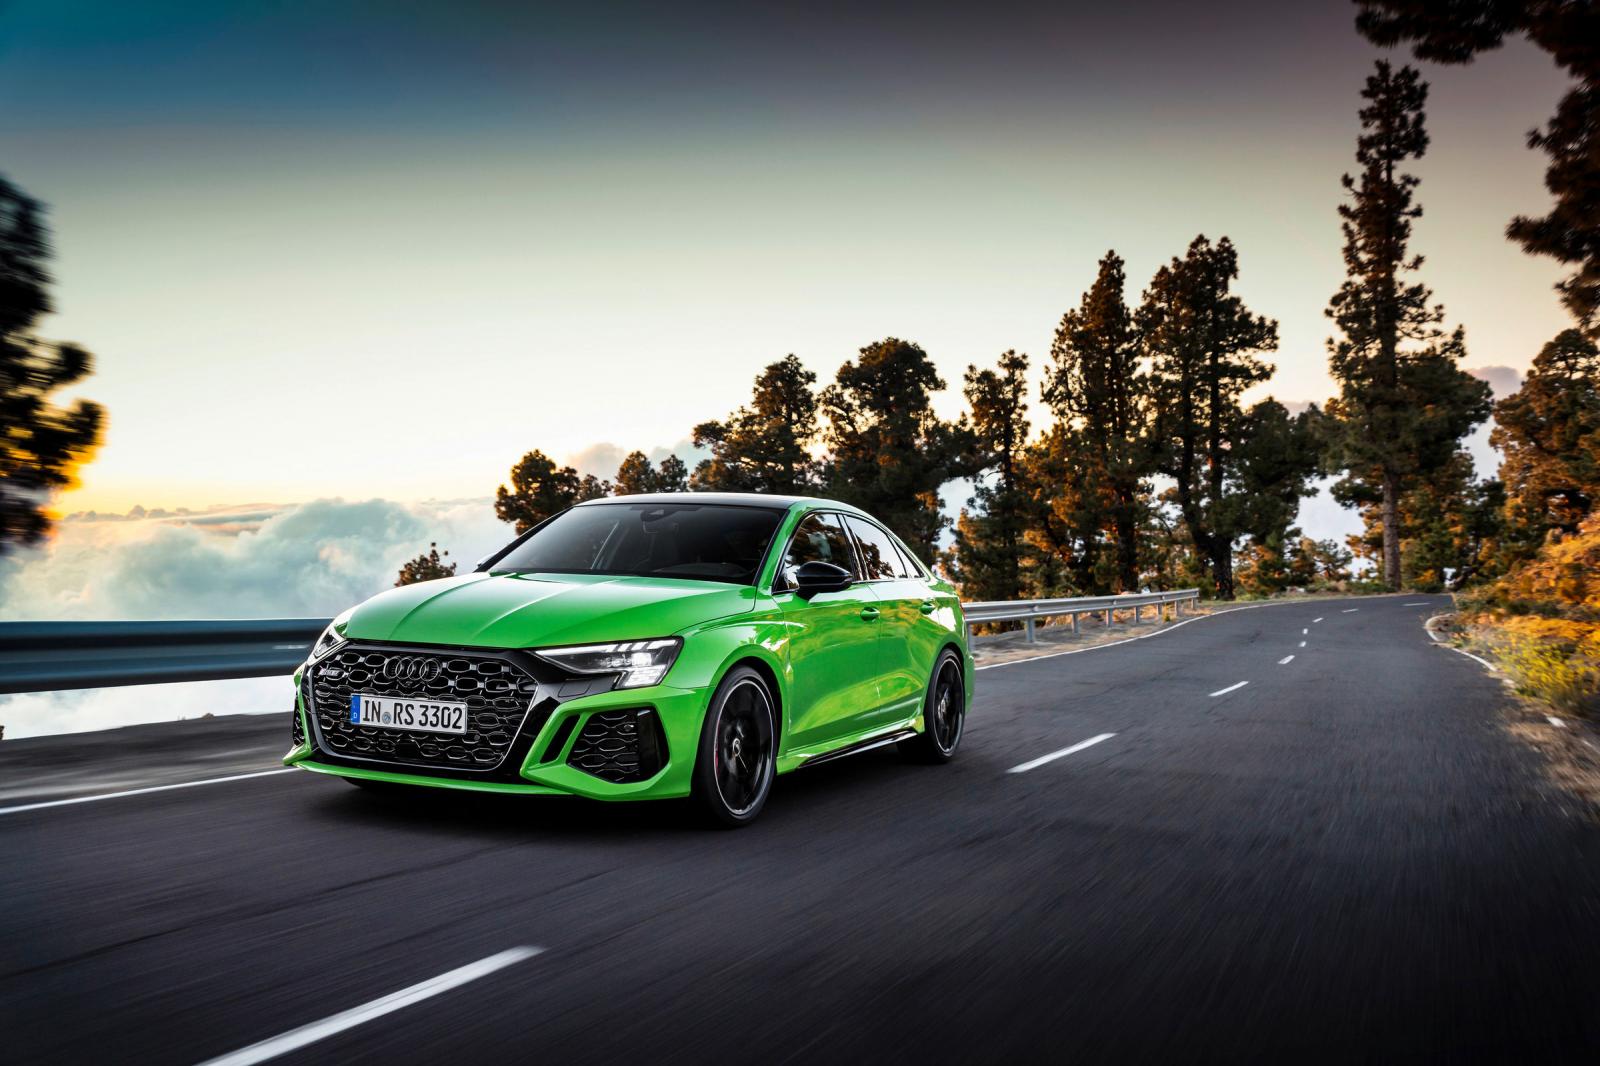 New 400 PS Audi RS 3 Promises to be an Everyday Sports Car